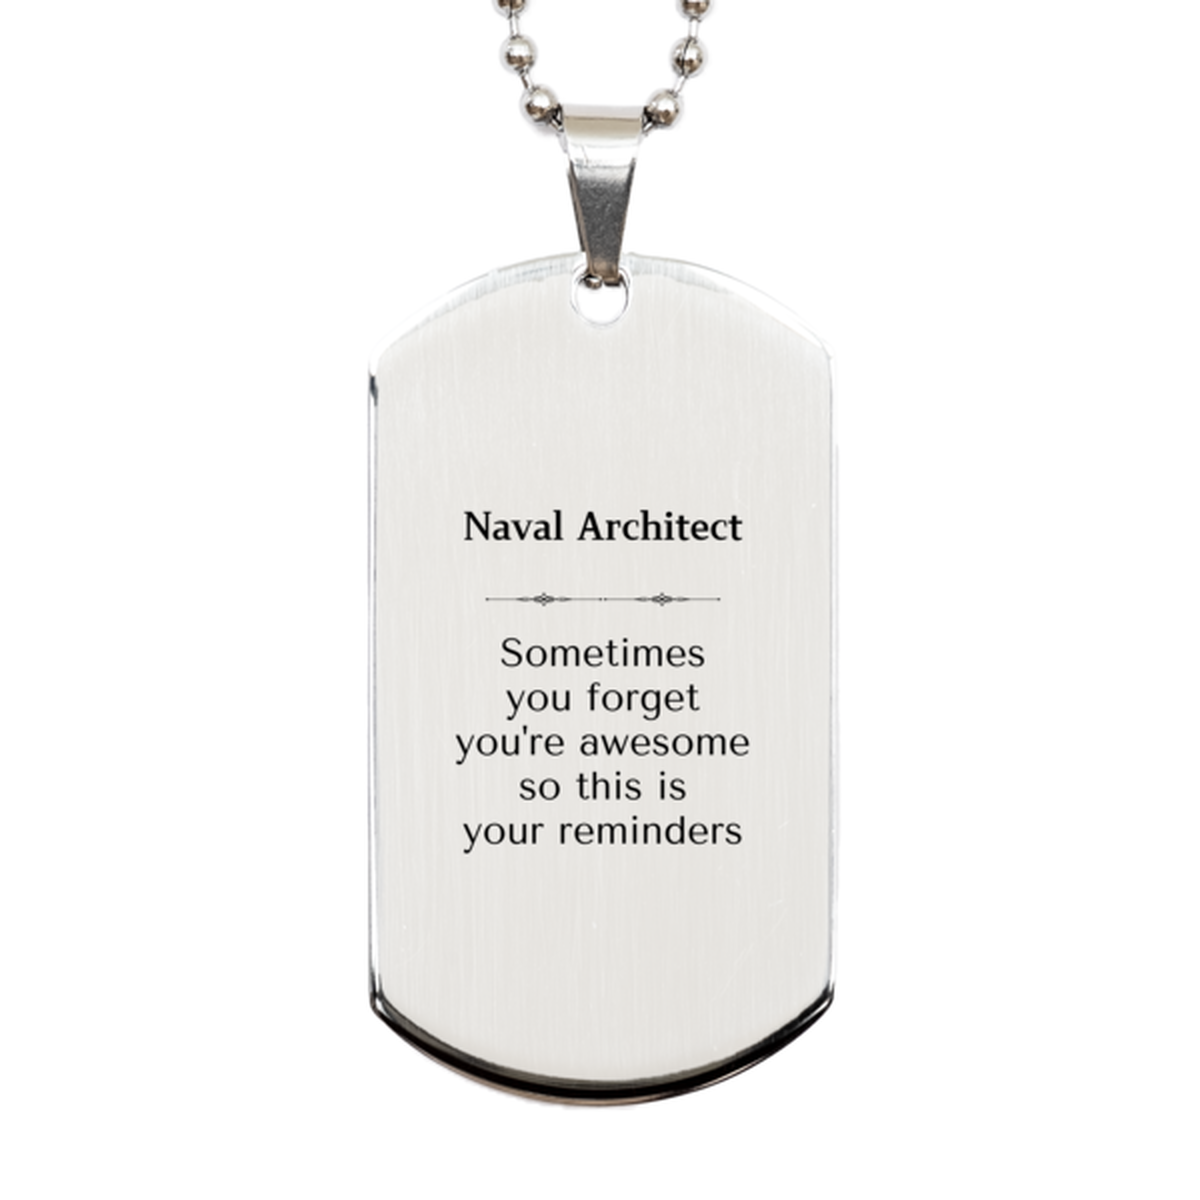 Sentimental Naval Architect Silver Dog Tag, Naval Architect Sometimes you forget you're awesome so this is your reminders, Graduation Christmas Birthday Gifts for Naval Architect, Men, Women, Coworkers